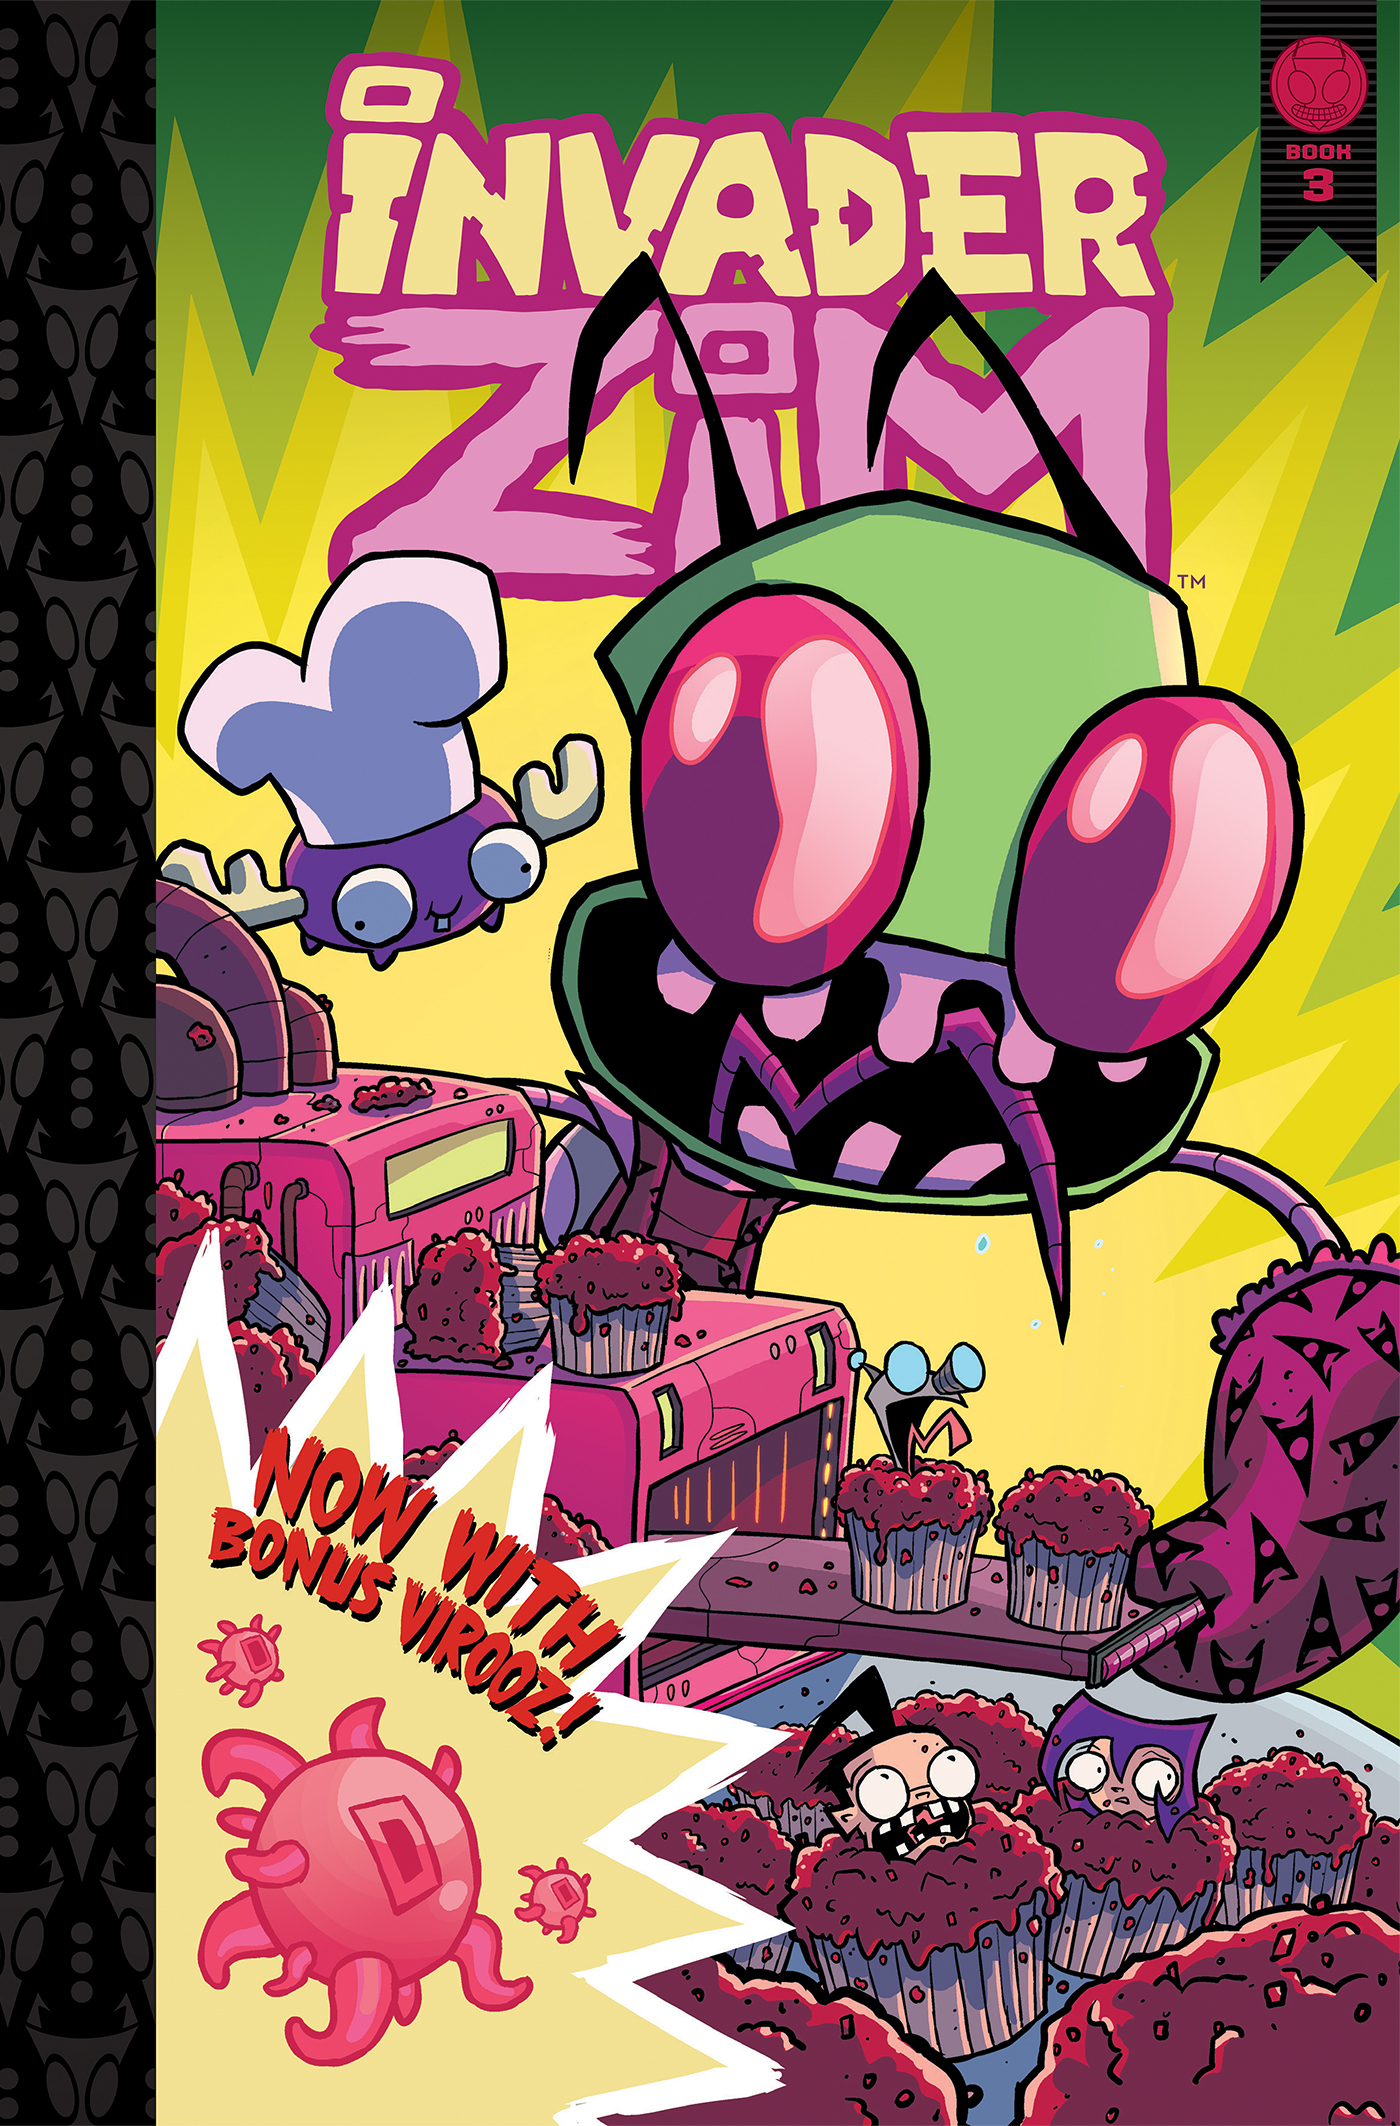 Invader Zim Hardcover Volume 3 Deluxe Edition